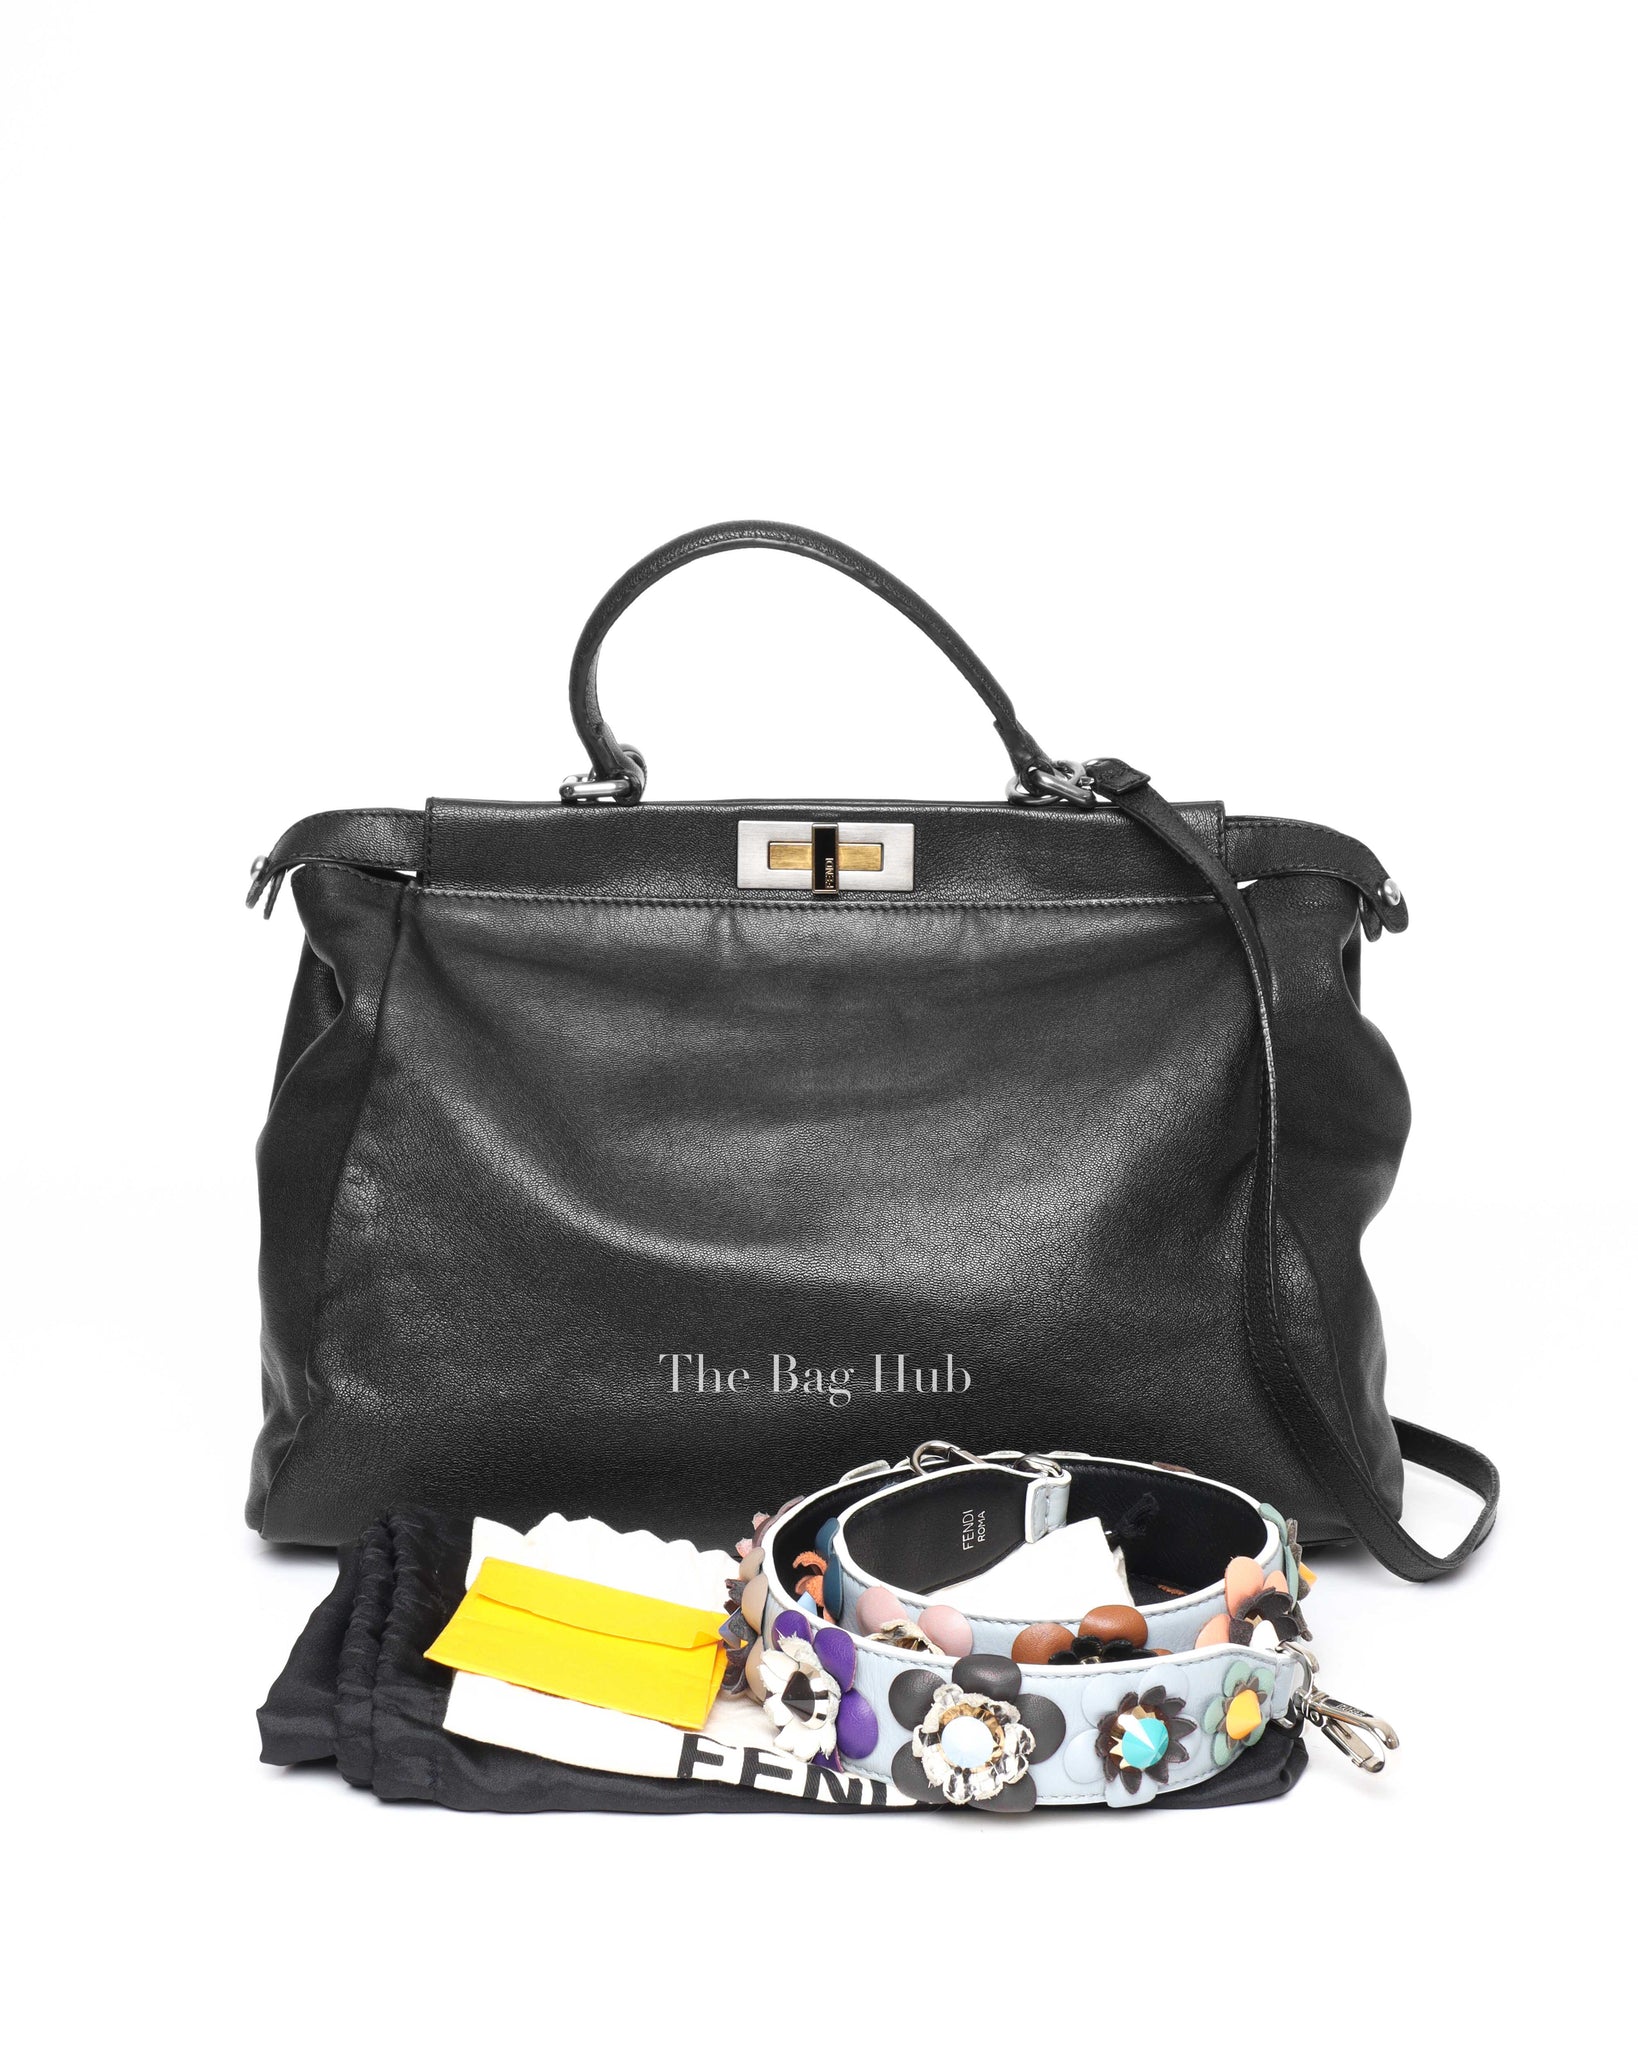 Fendi Black Leather Peekaboo Large with Floral Strap